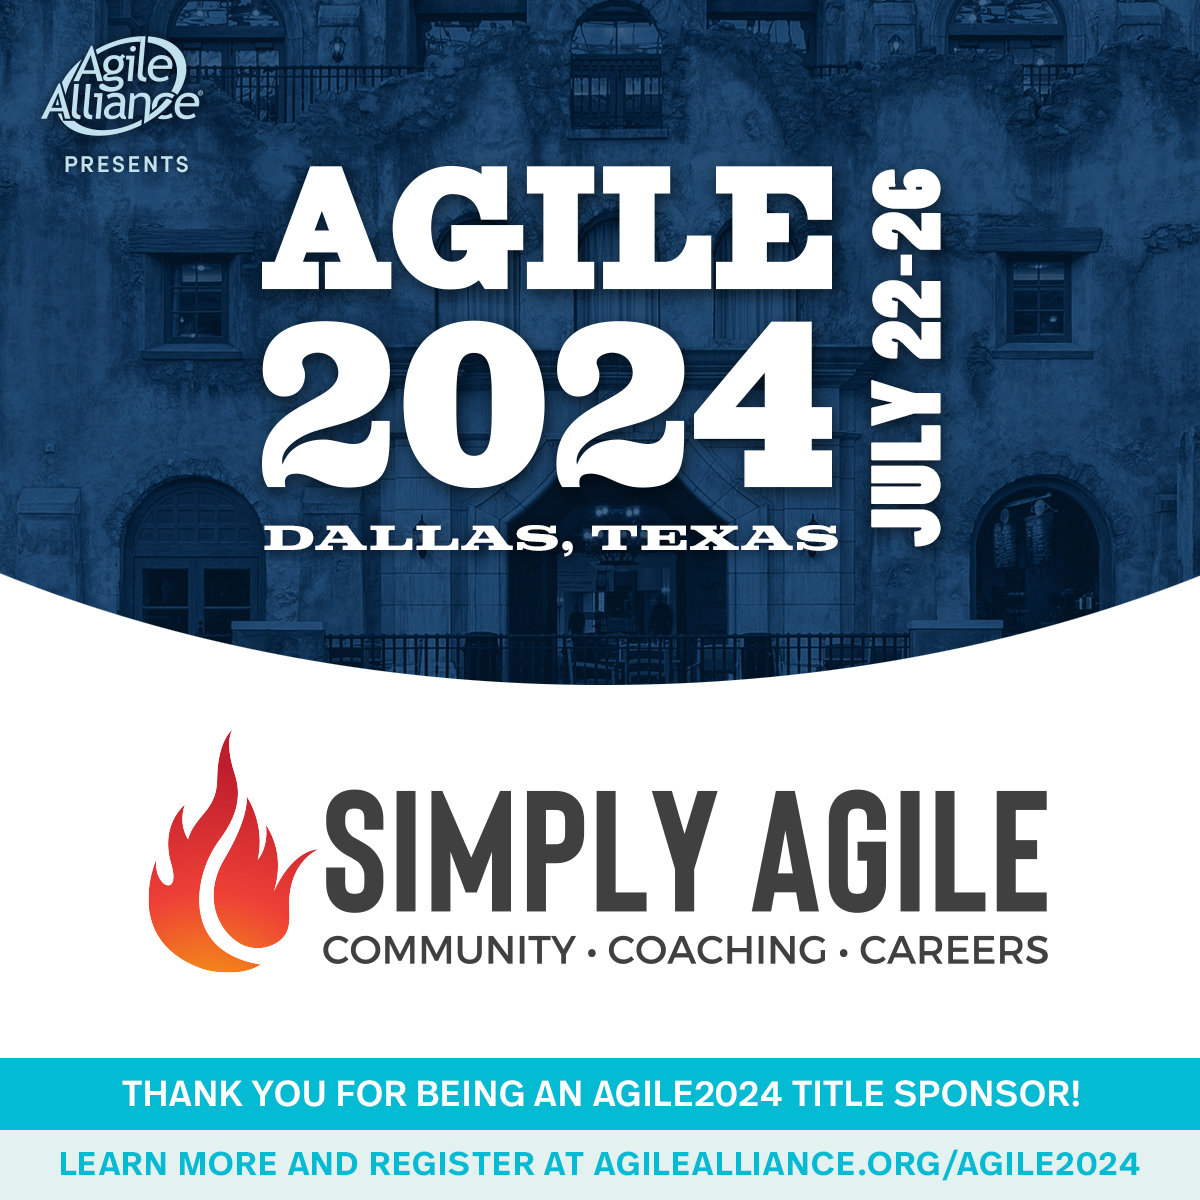 We're excited to announce that @simplyagileinc is a Title Sponsor for #Agile2024 coming this July to Dallas, TX. Please join us in thanking them for their important and valued support of our non-profit membership organization. Learn more and register now: agilealliance.org/agile2024/